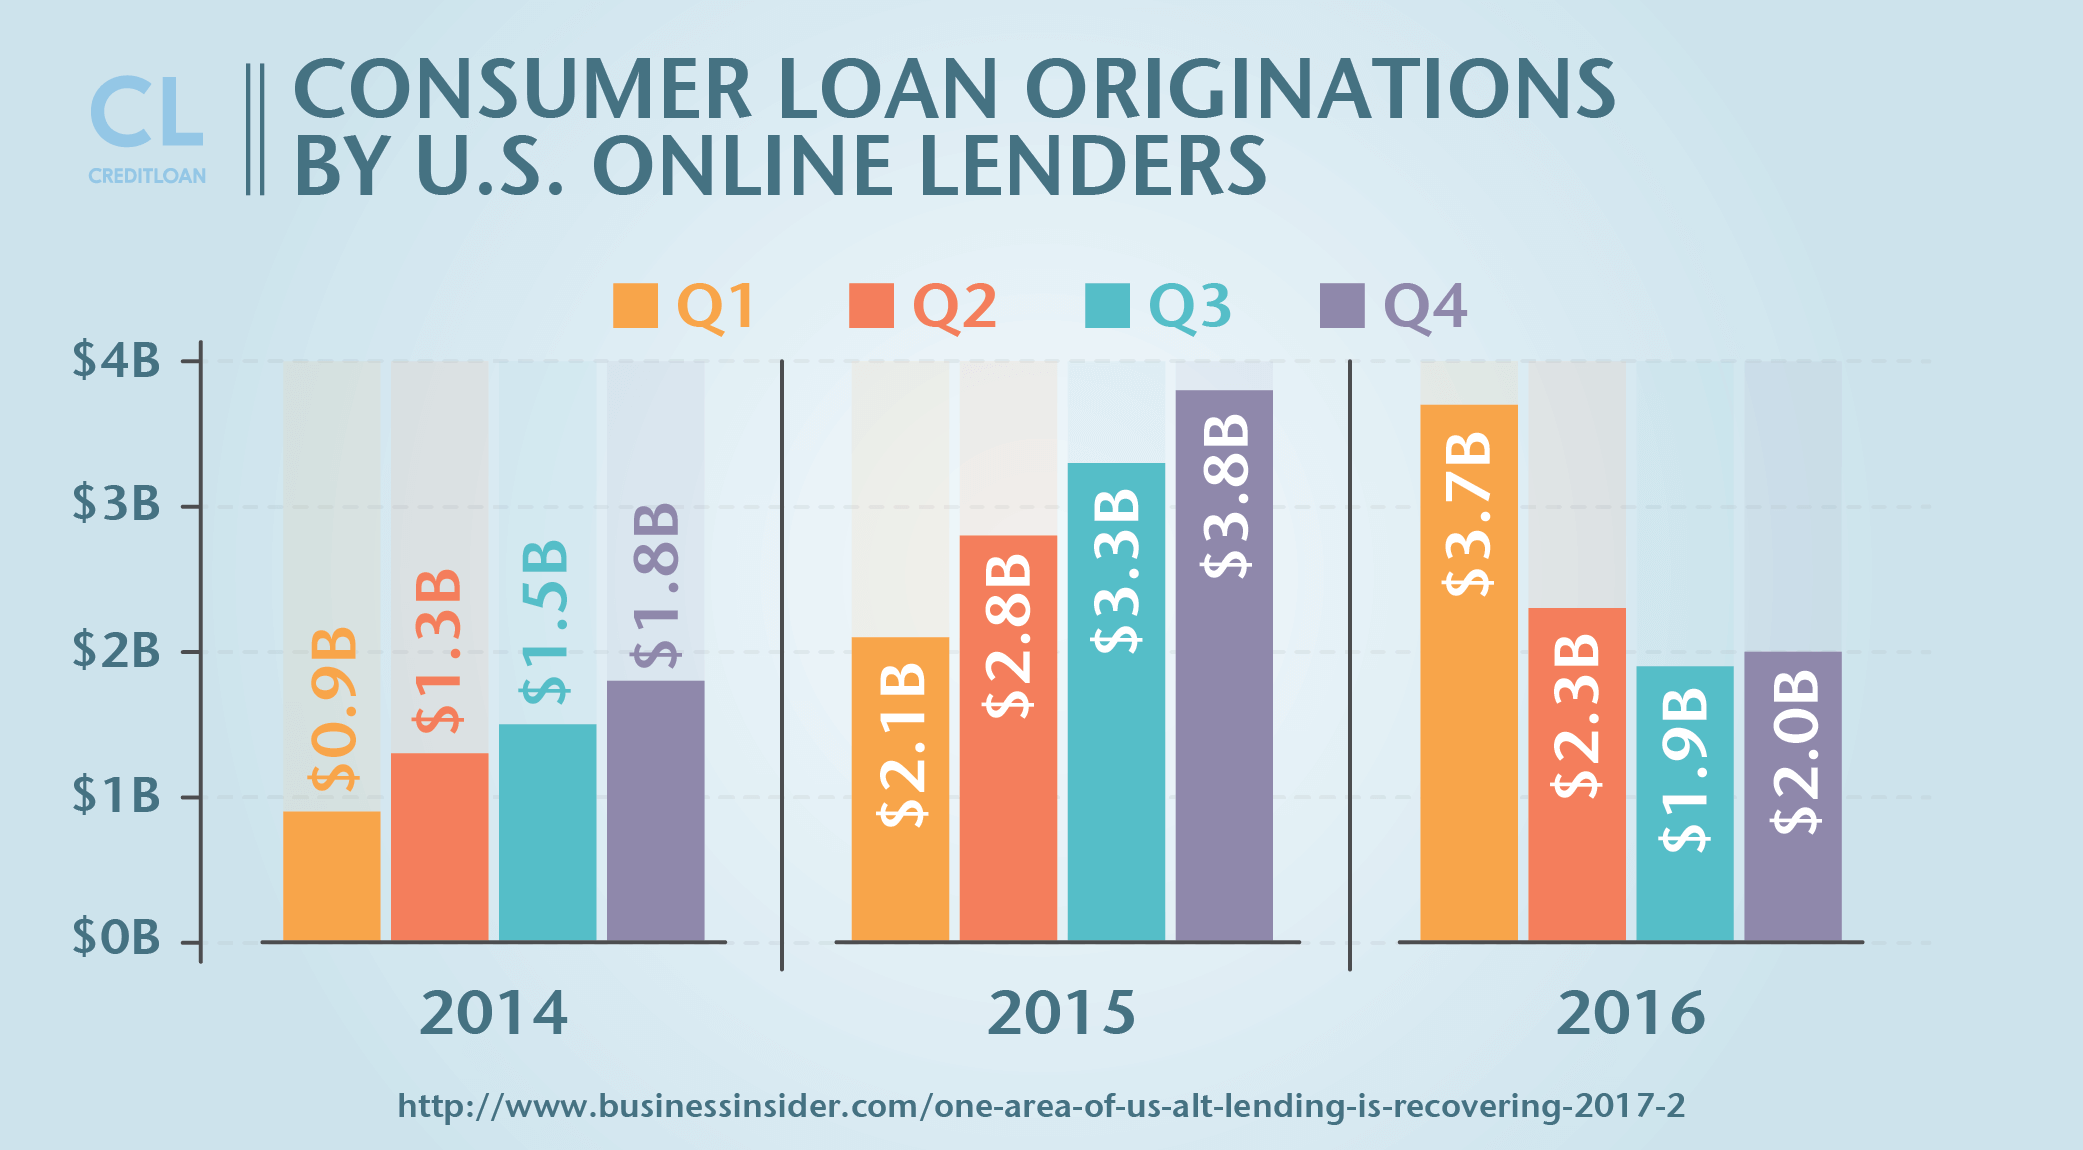 Consumer Loan Originations By U.S. Online Lenders from 2014-2016